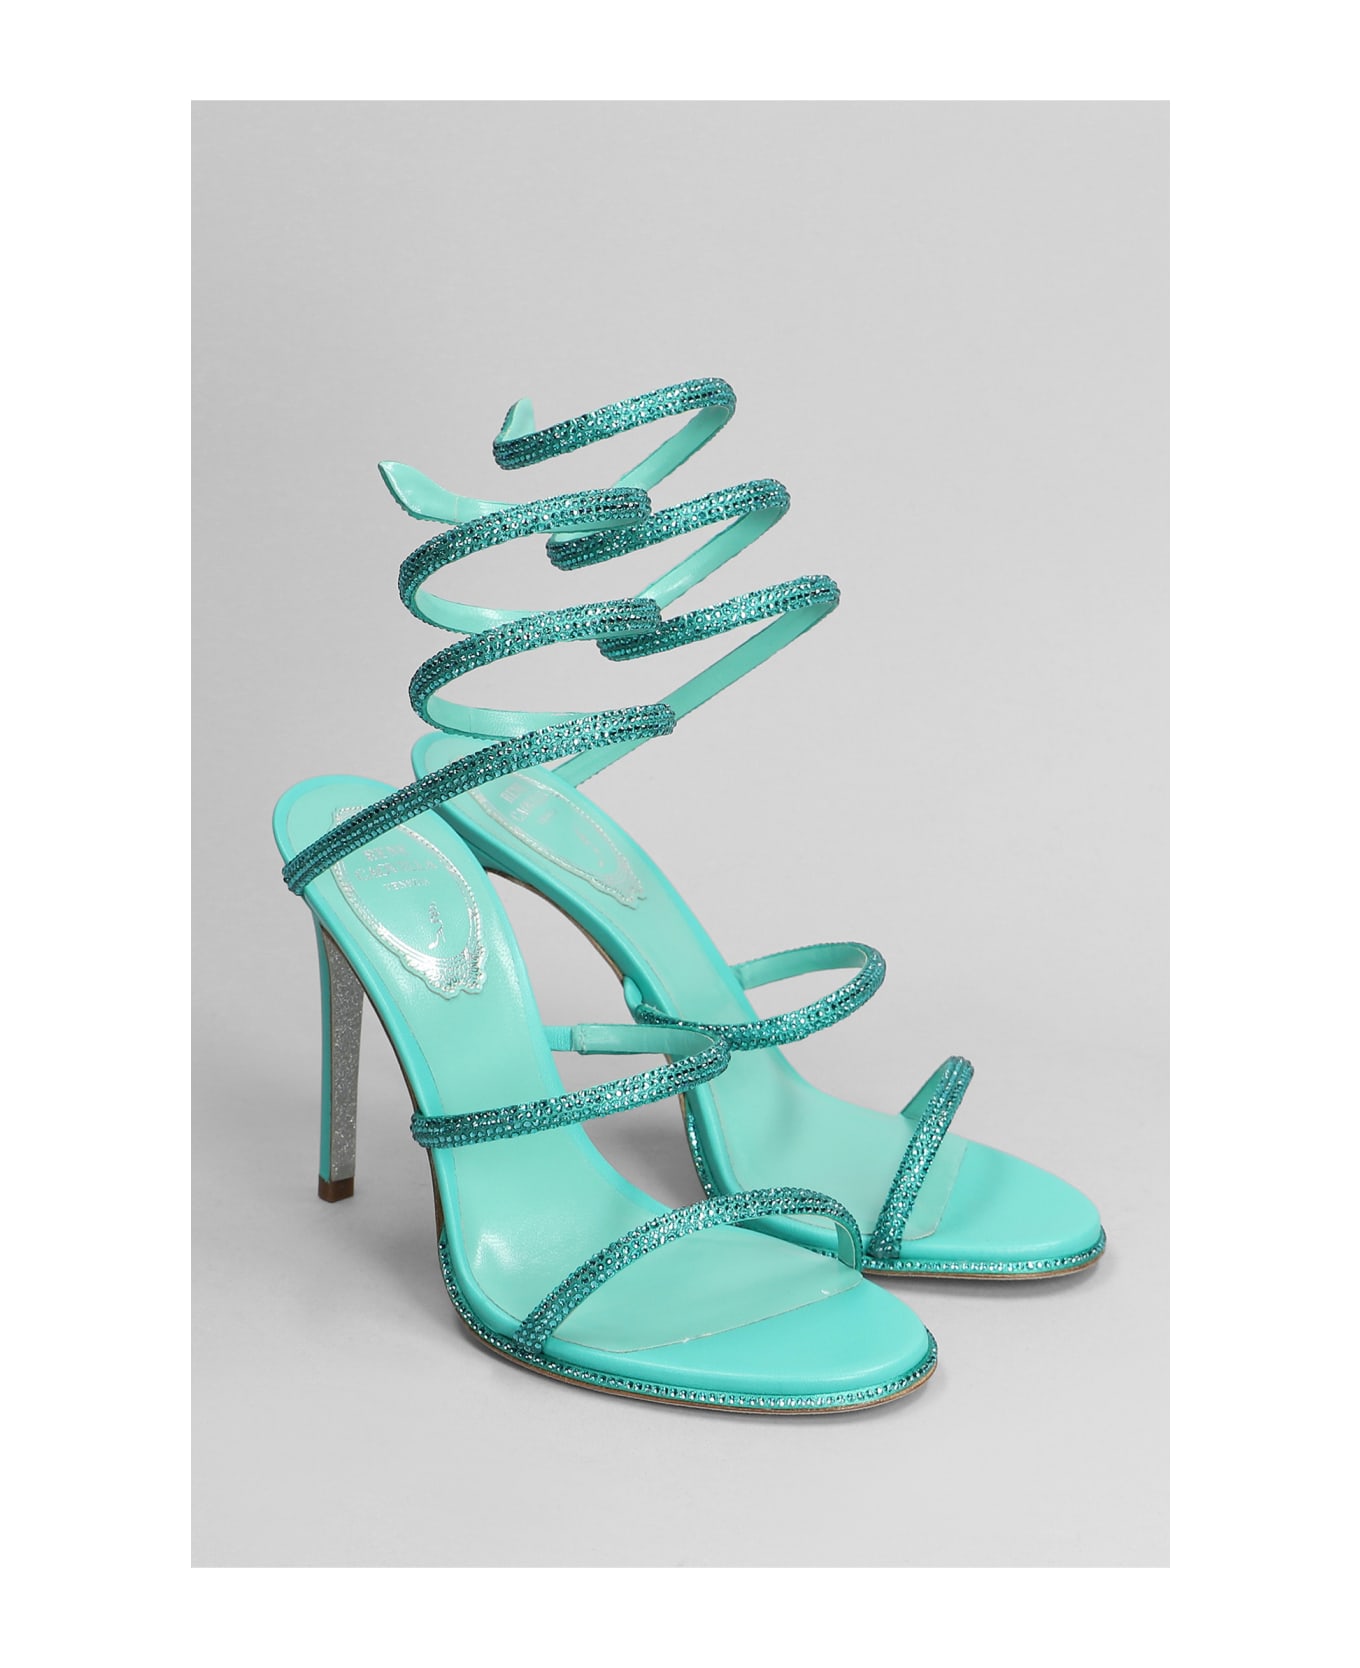 René Caovilla Cleo Sandals In Green Leather - green